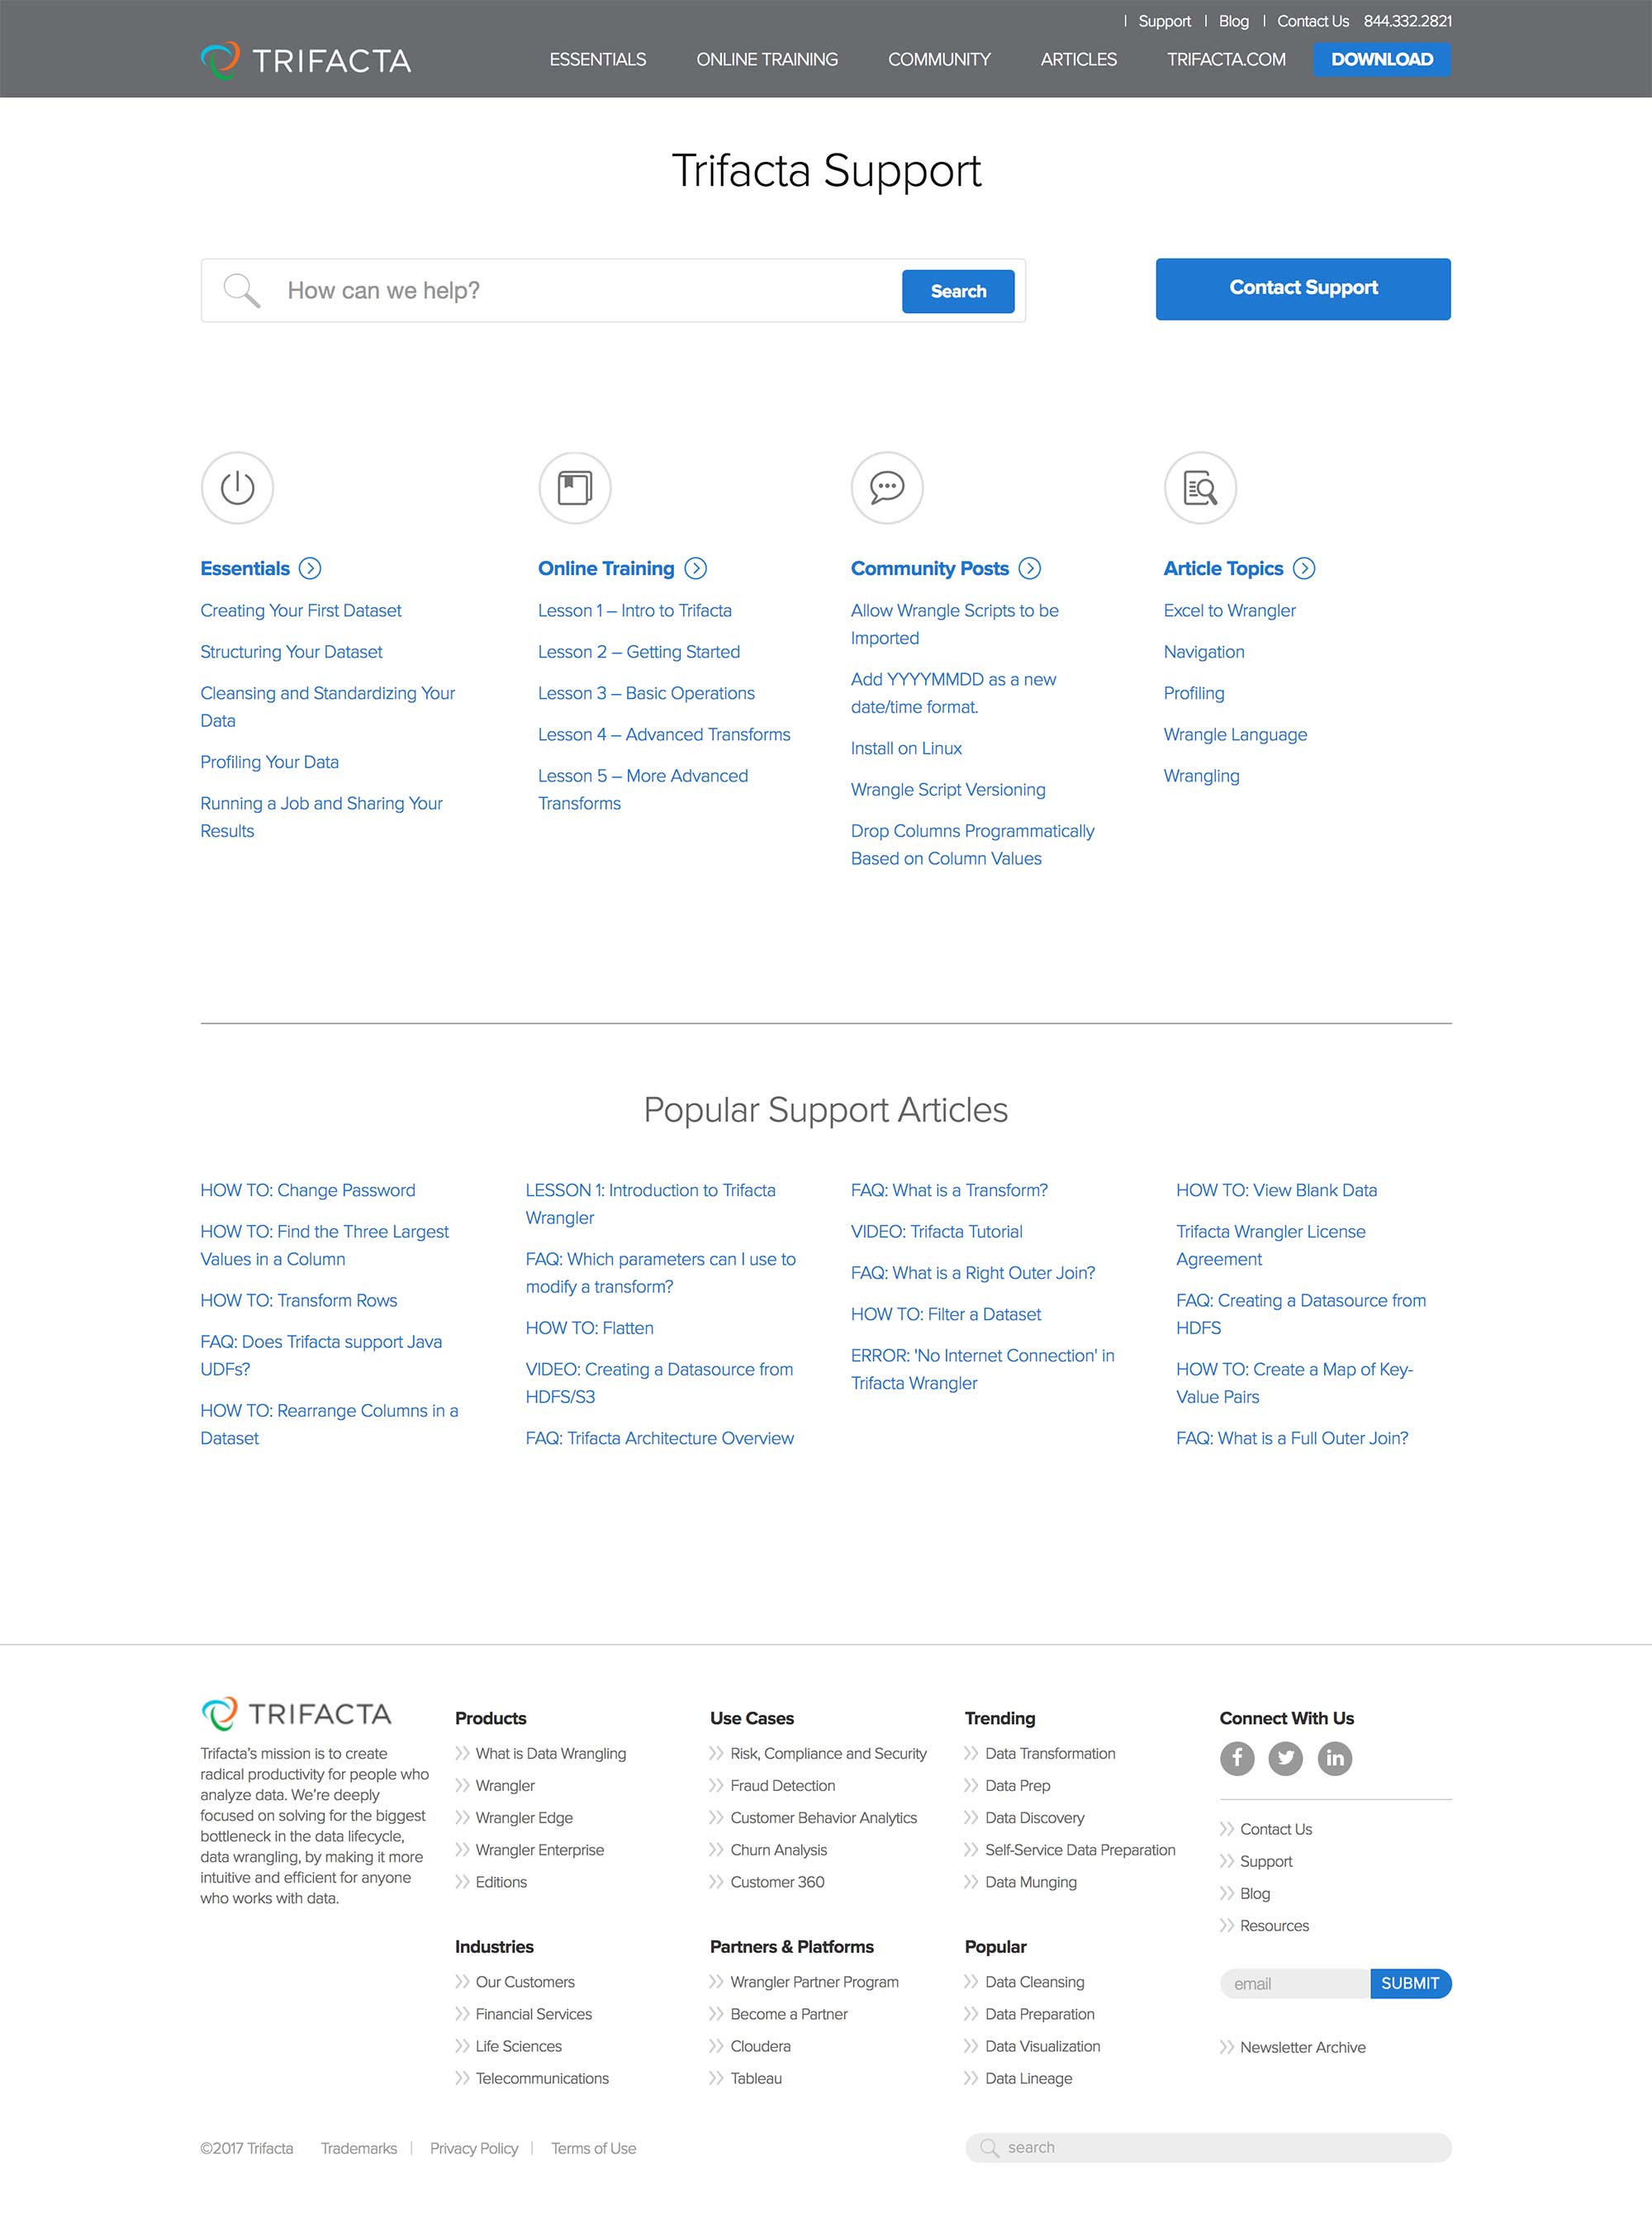 Screen shot of the Trifacta Support WordPress site by Lee Powers.